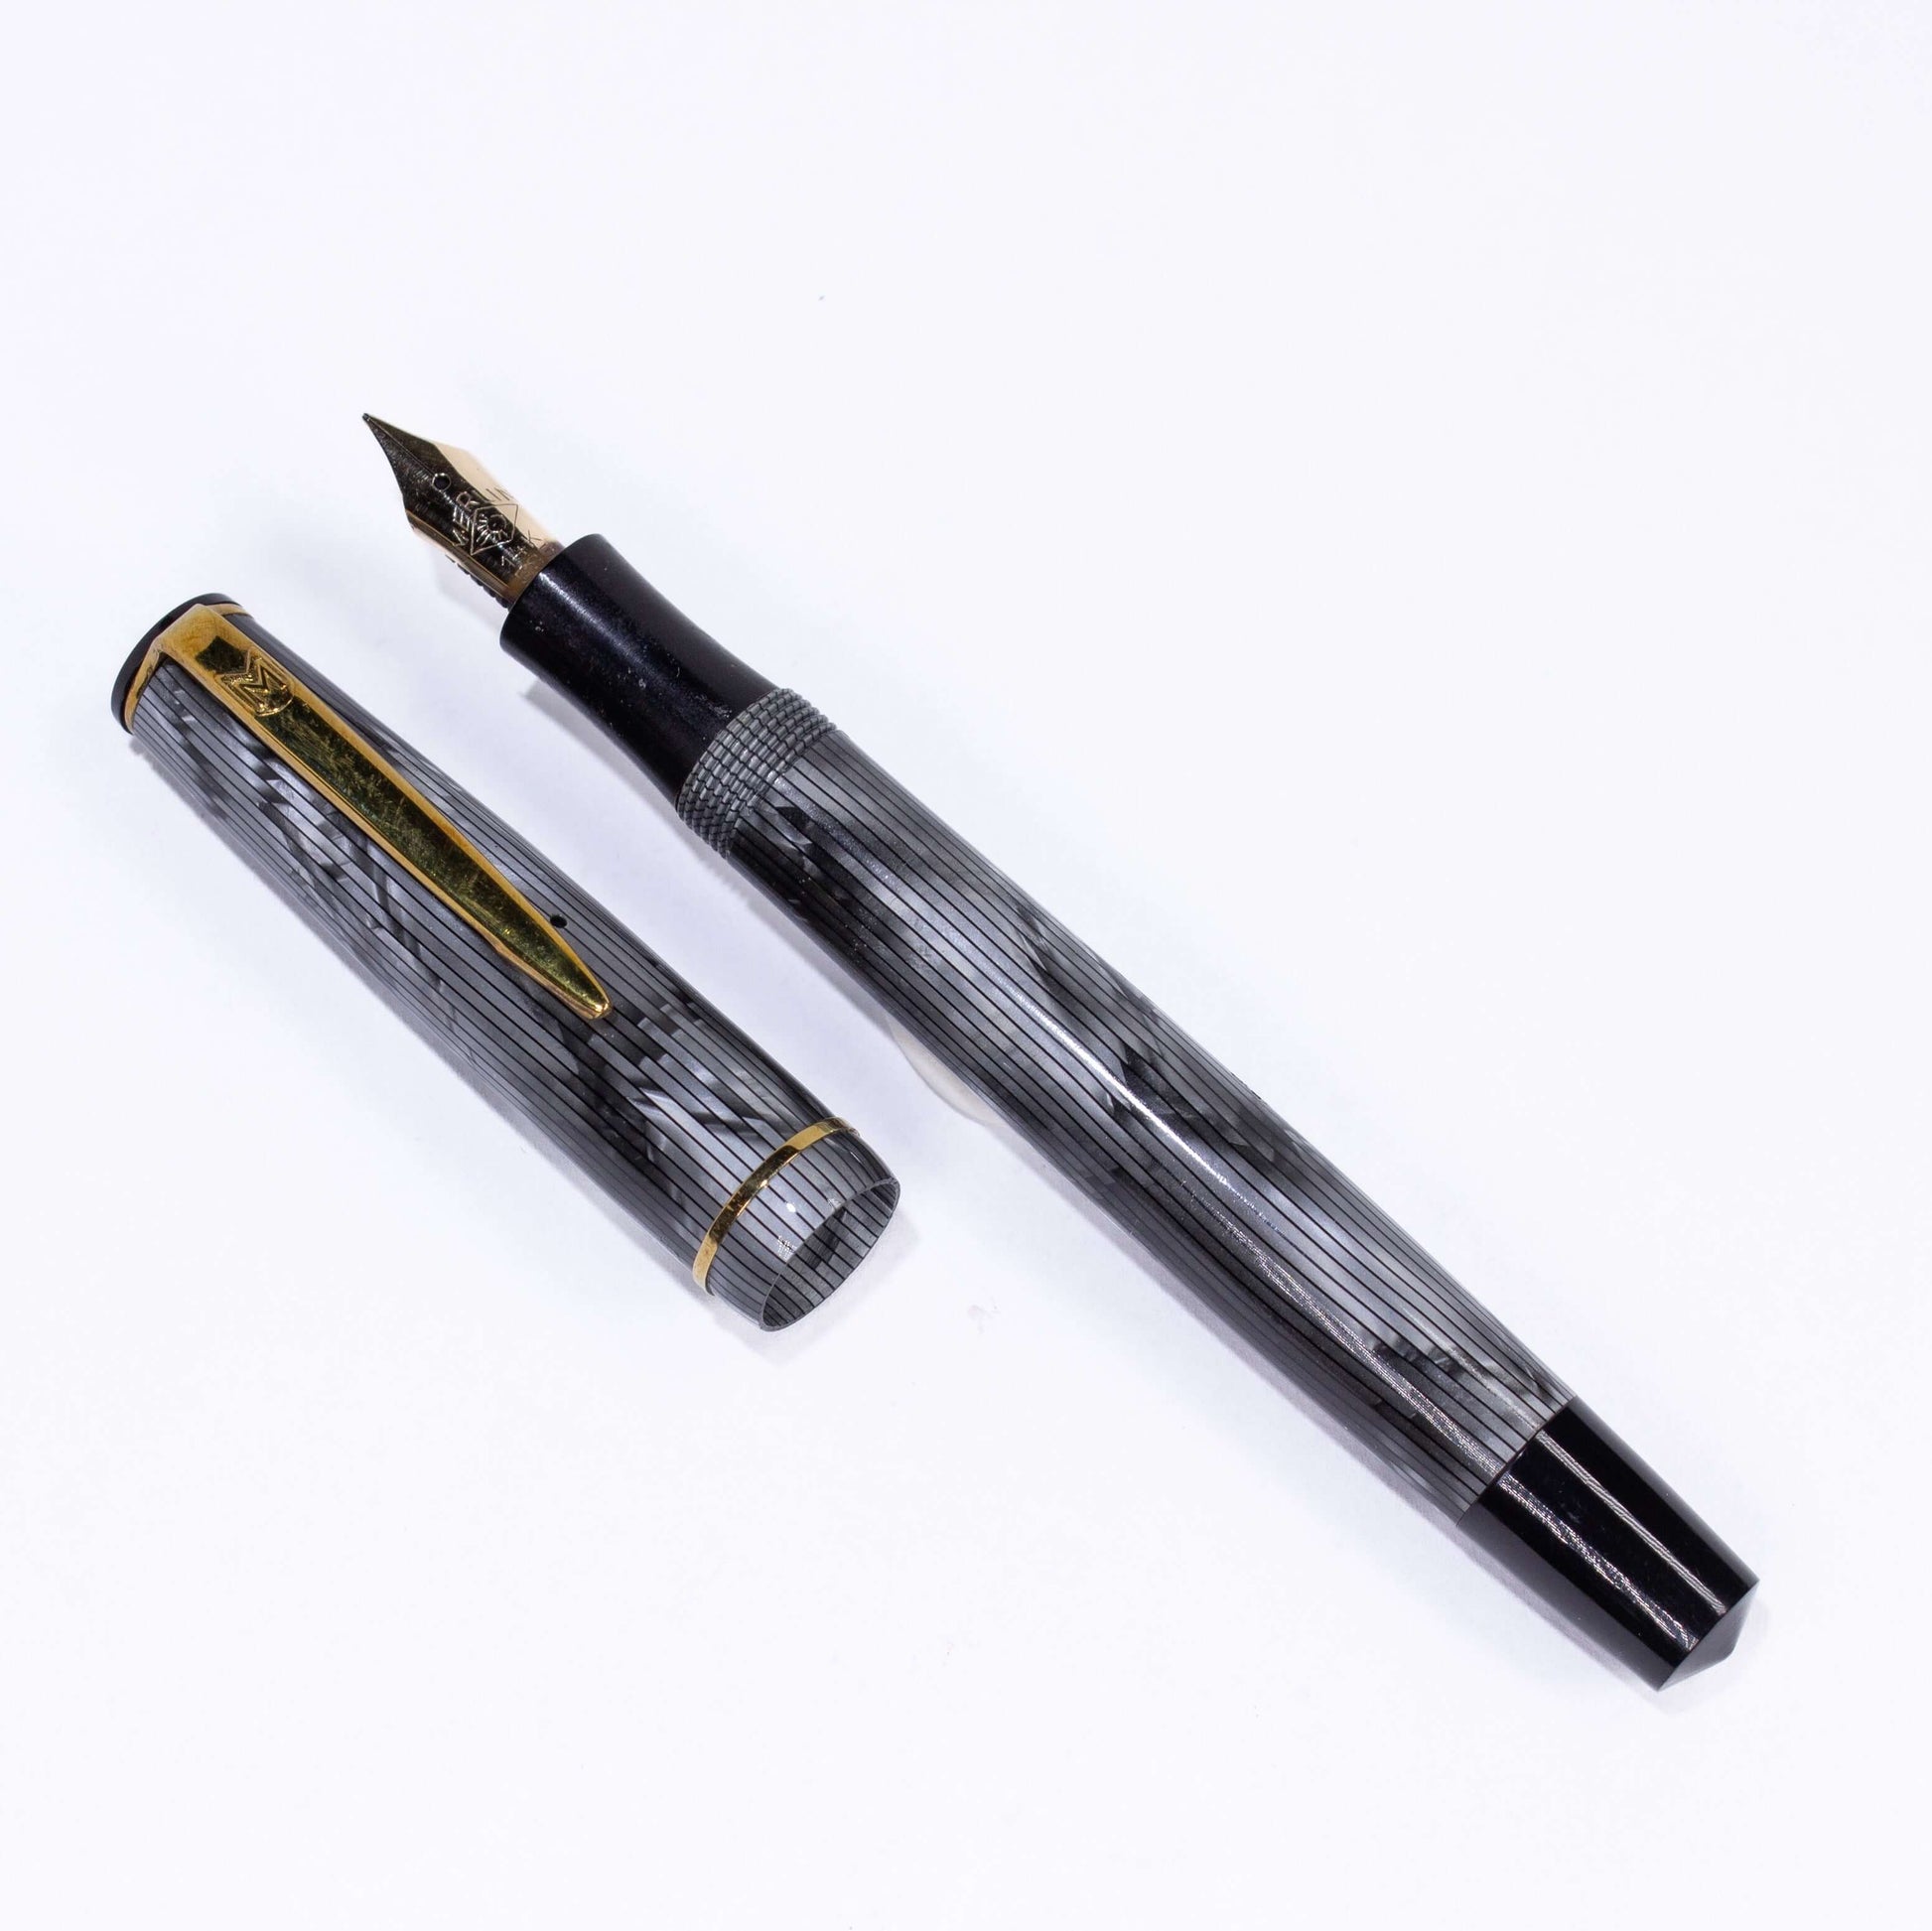 Merlin 33 Fountain Pen, Grey Pearl, Gold Trim 14K Merlin Nib, Flexible, Button Filler with New Sac Installed Type: Vintage Button Filler Fountain Pen Product Name: Merlin Manufacture Year: 1950s, made in Europe Length: 4 3/4 Filling System: Button Filler,